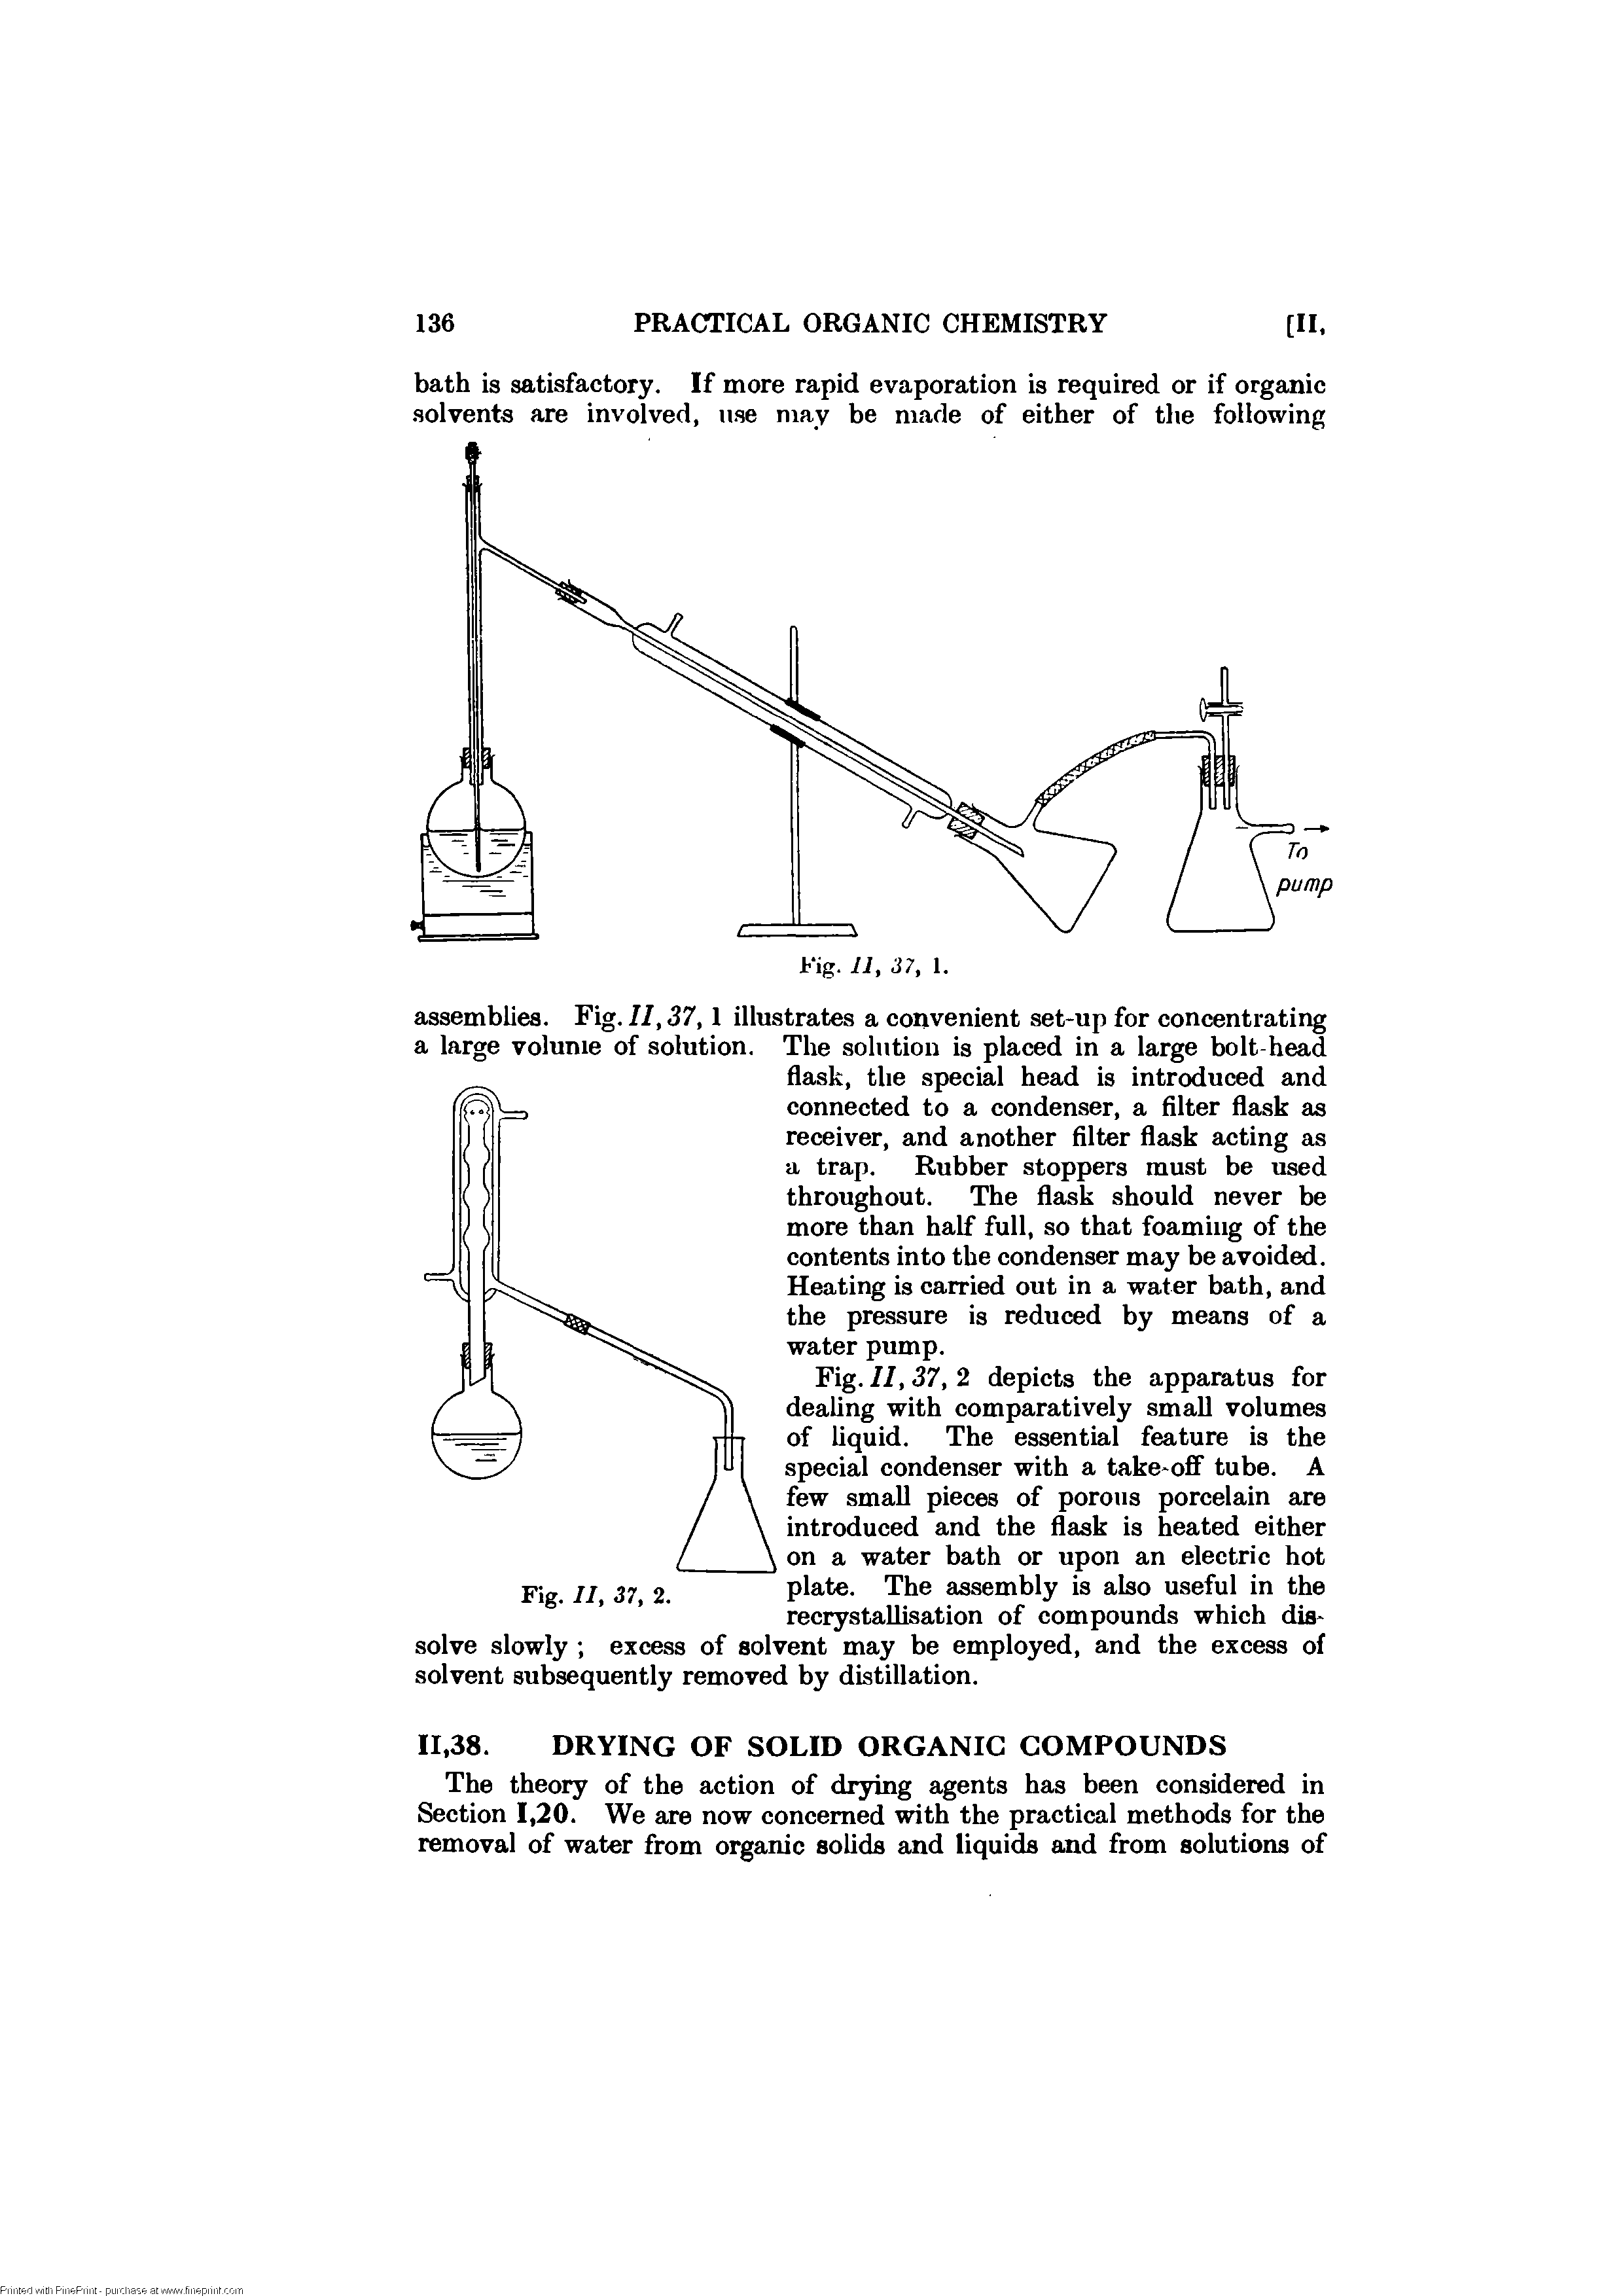 Fig. II, 37, 2 depicts the apparatus for dealing with comparatively small volumes of liquid. The essential feature is the special condenser with a take-off tube. A few small pieces of porous porcelain are introduced and the flask is heated either on a water bath or upon an electric hot plate. The assembly is also useful in the recrystaUisation of compounds which dissolve slowly excess of solvent may be employed, and the excess of solvent subsequently removed by distillation.